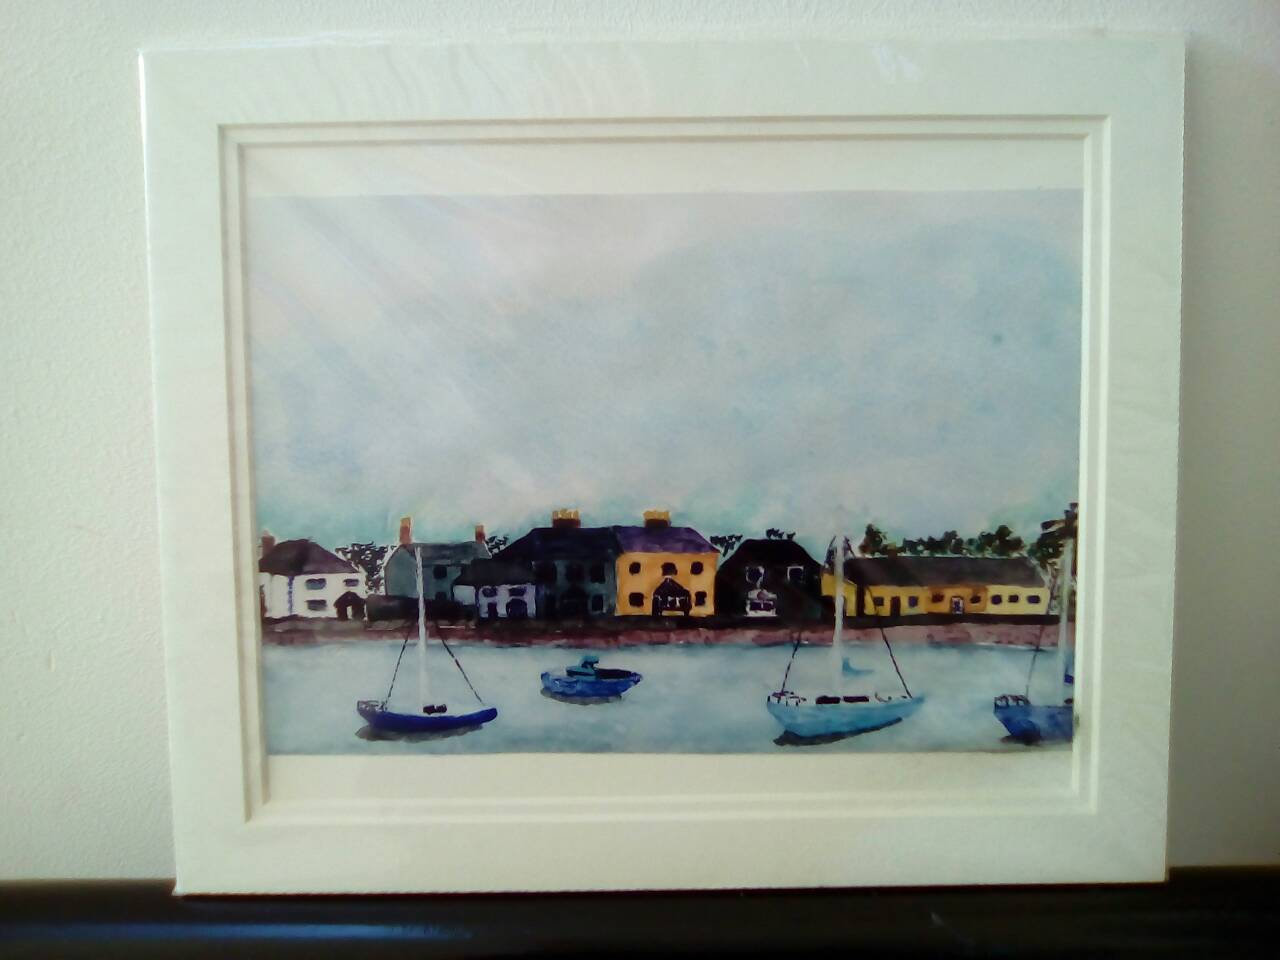 18 Fashionable Waterford 10 Inch Vase 2024 free download waterford 10 inch vase of painting print of view from dungarvan harbour co etsy within dc29fc294c28ezoom